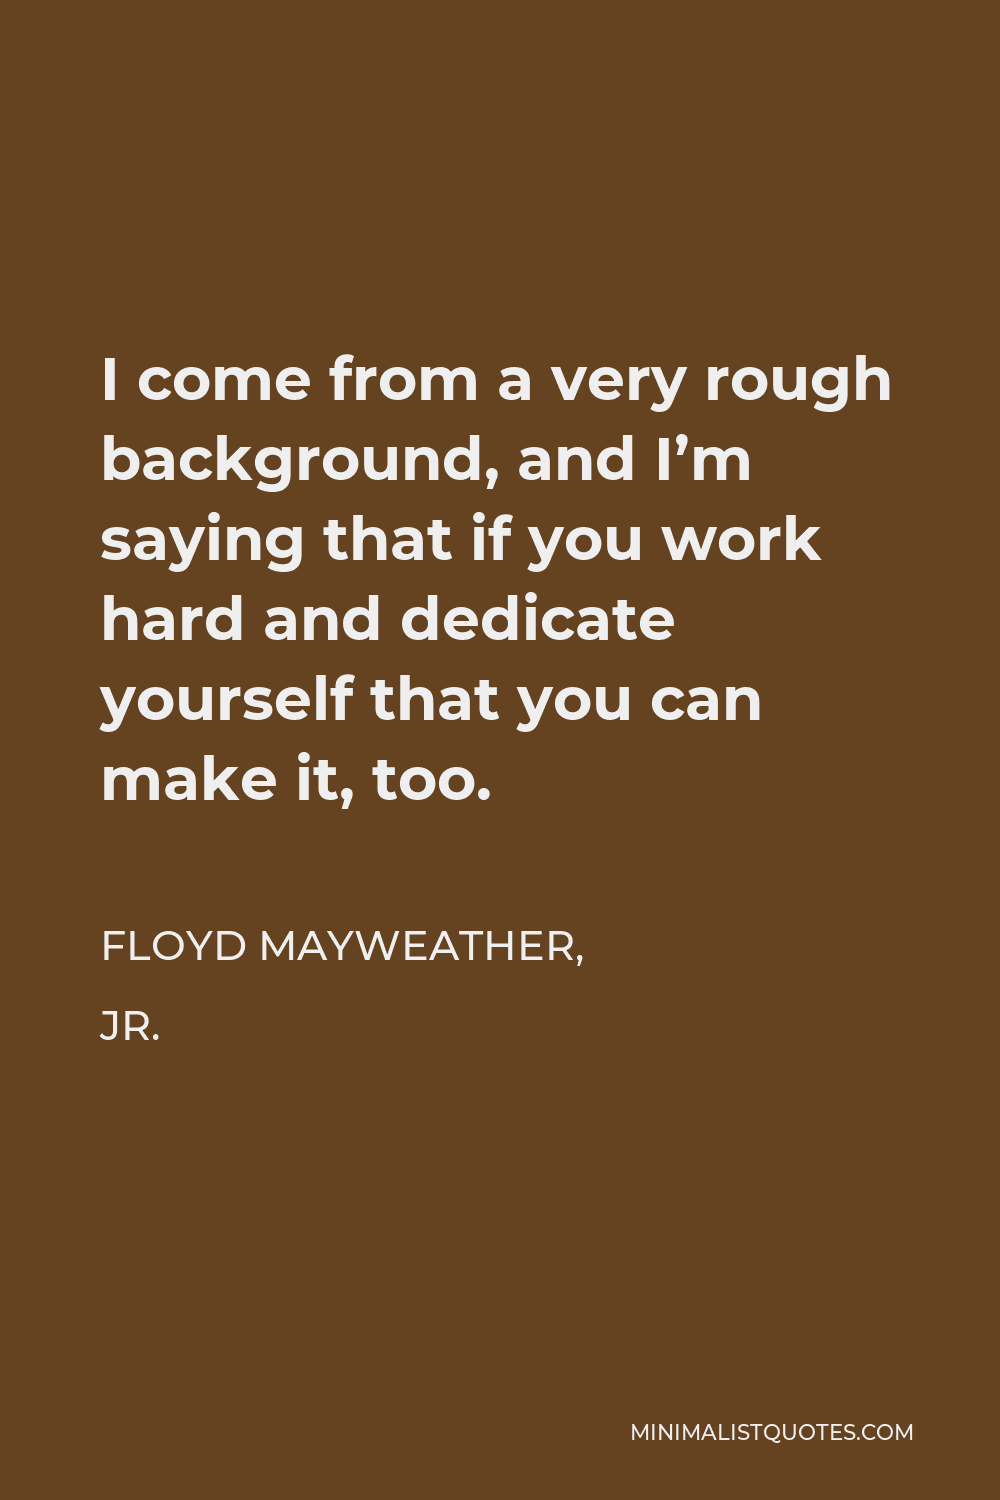 Floyd Mayweather, Jr. Quote - I come from a very rough background, and I’m saying that if you work hard and dedicate yourself that you can make it, too.